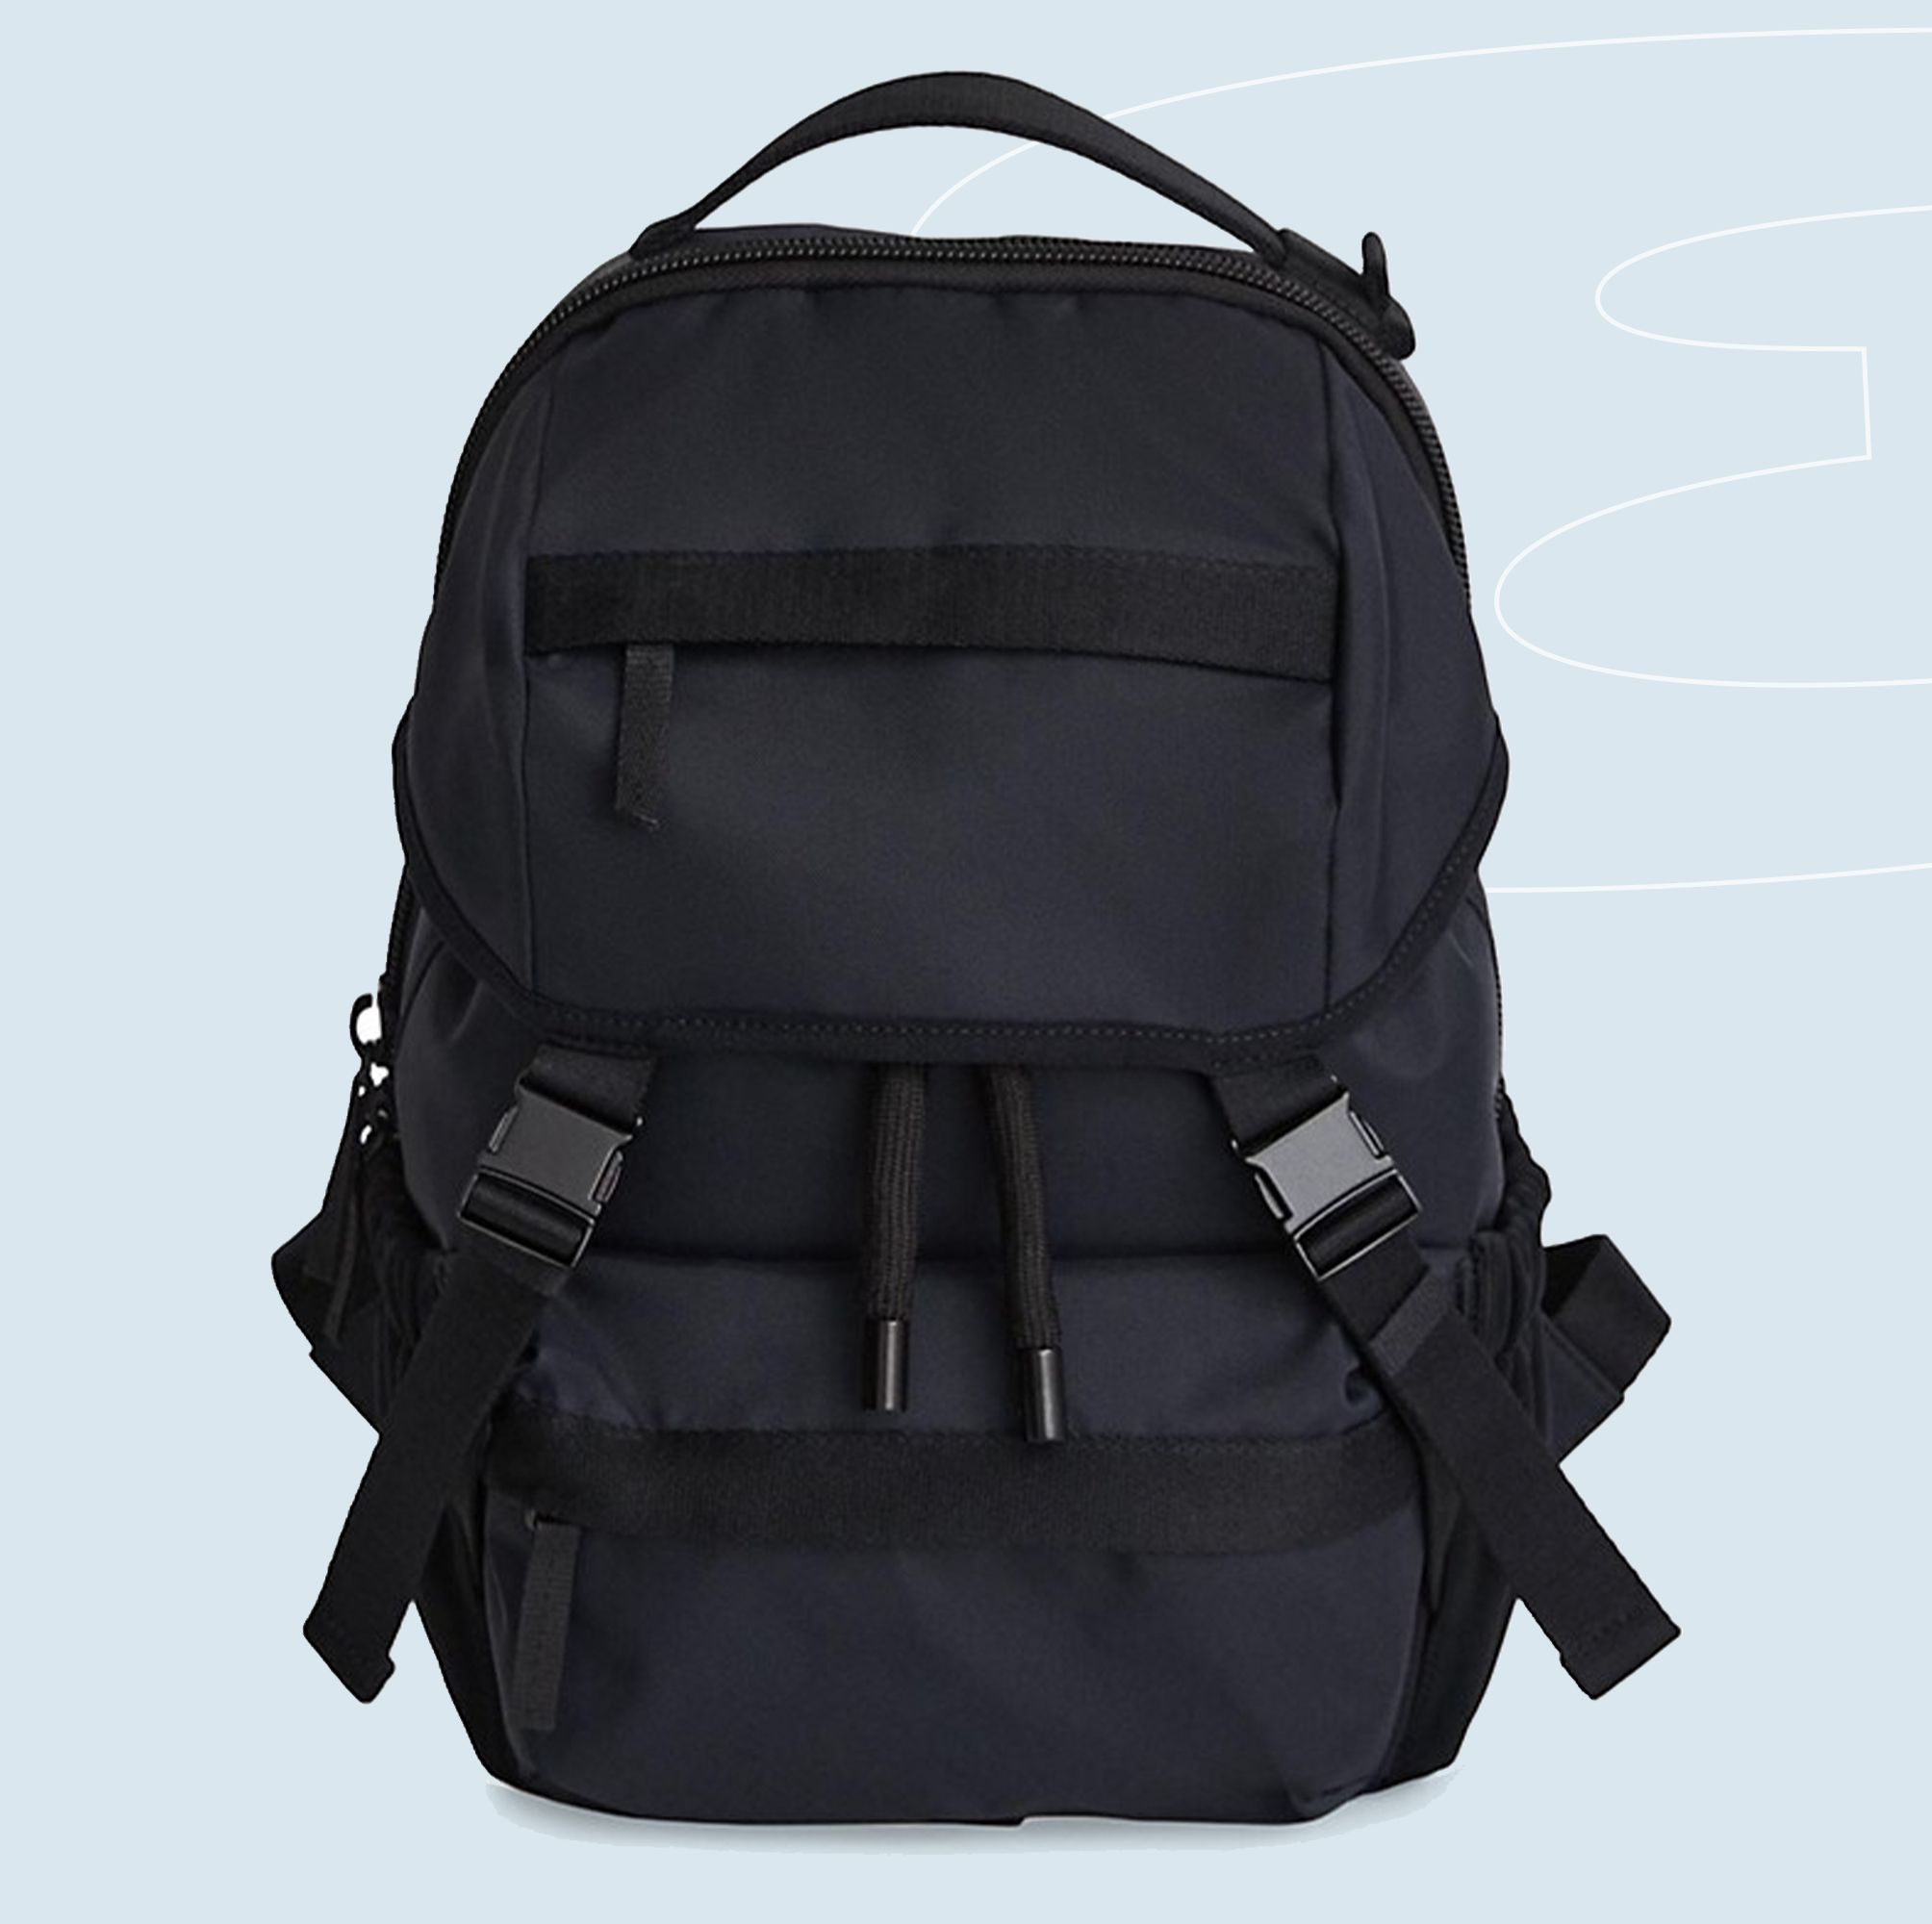 The 10 Best Travel Backpacks for Men to Take on the Go